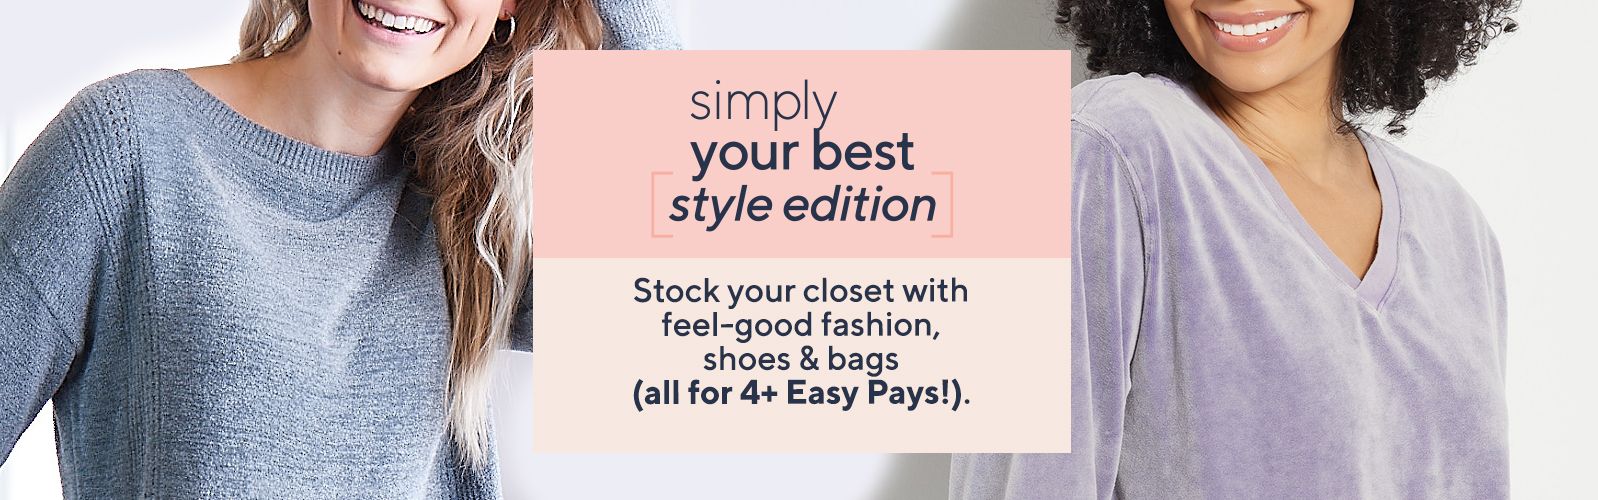 Simply Your Best—Style Edition - Stock your closet with feel-good fashion, shoes & bags (all for 4 or more Easy Pays!). 